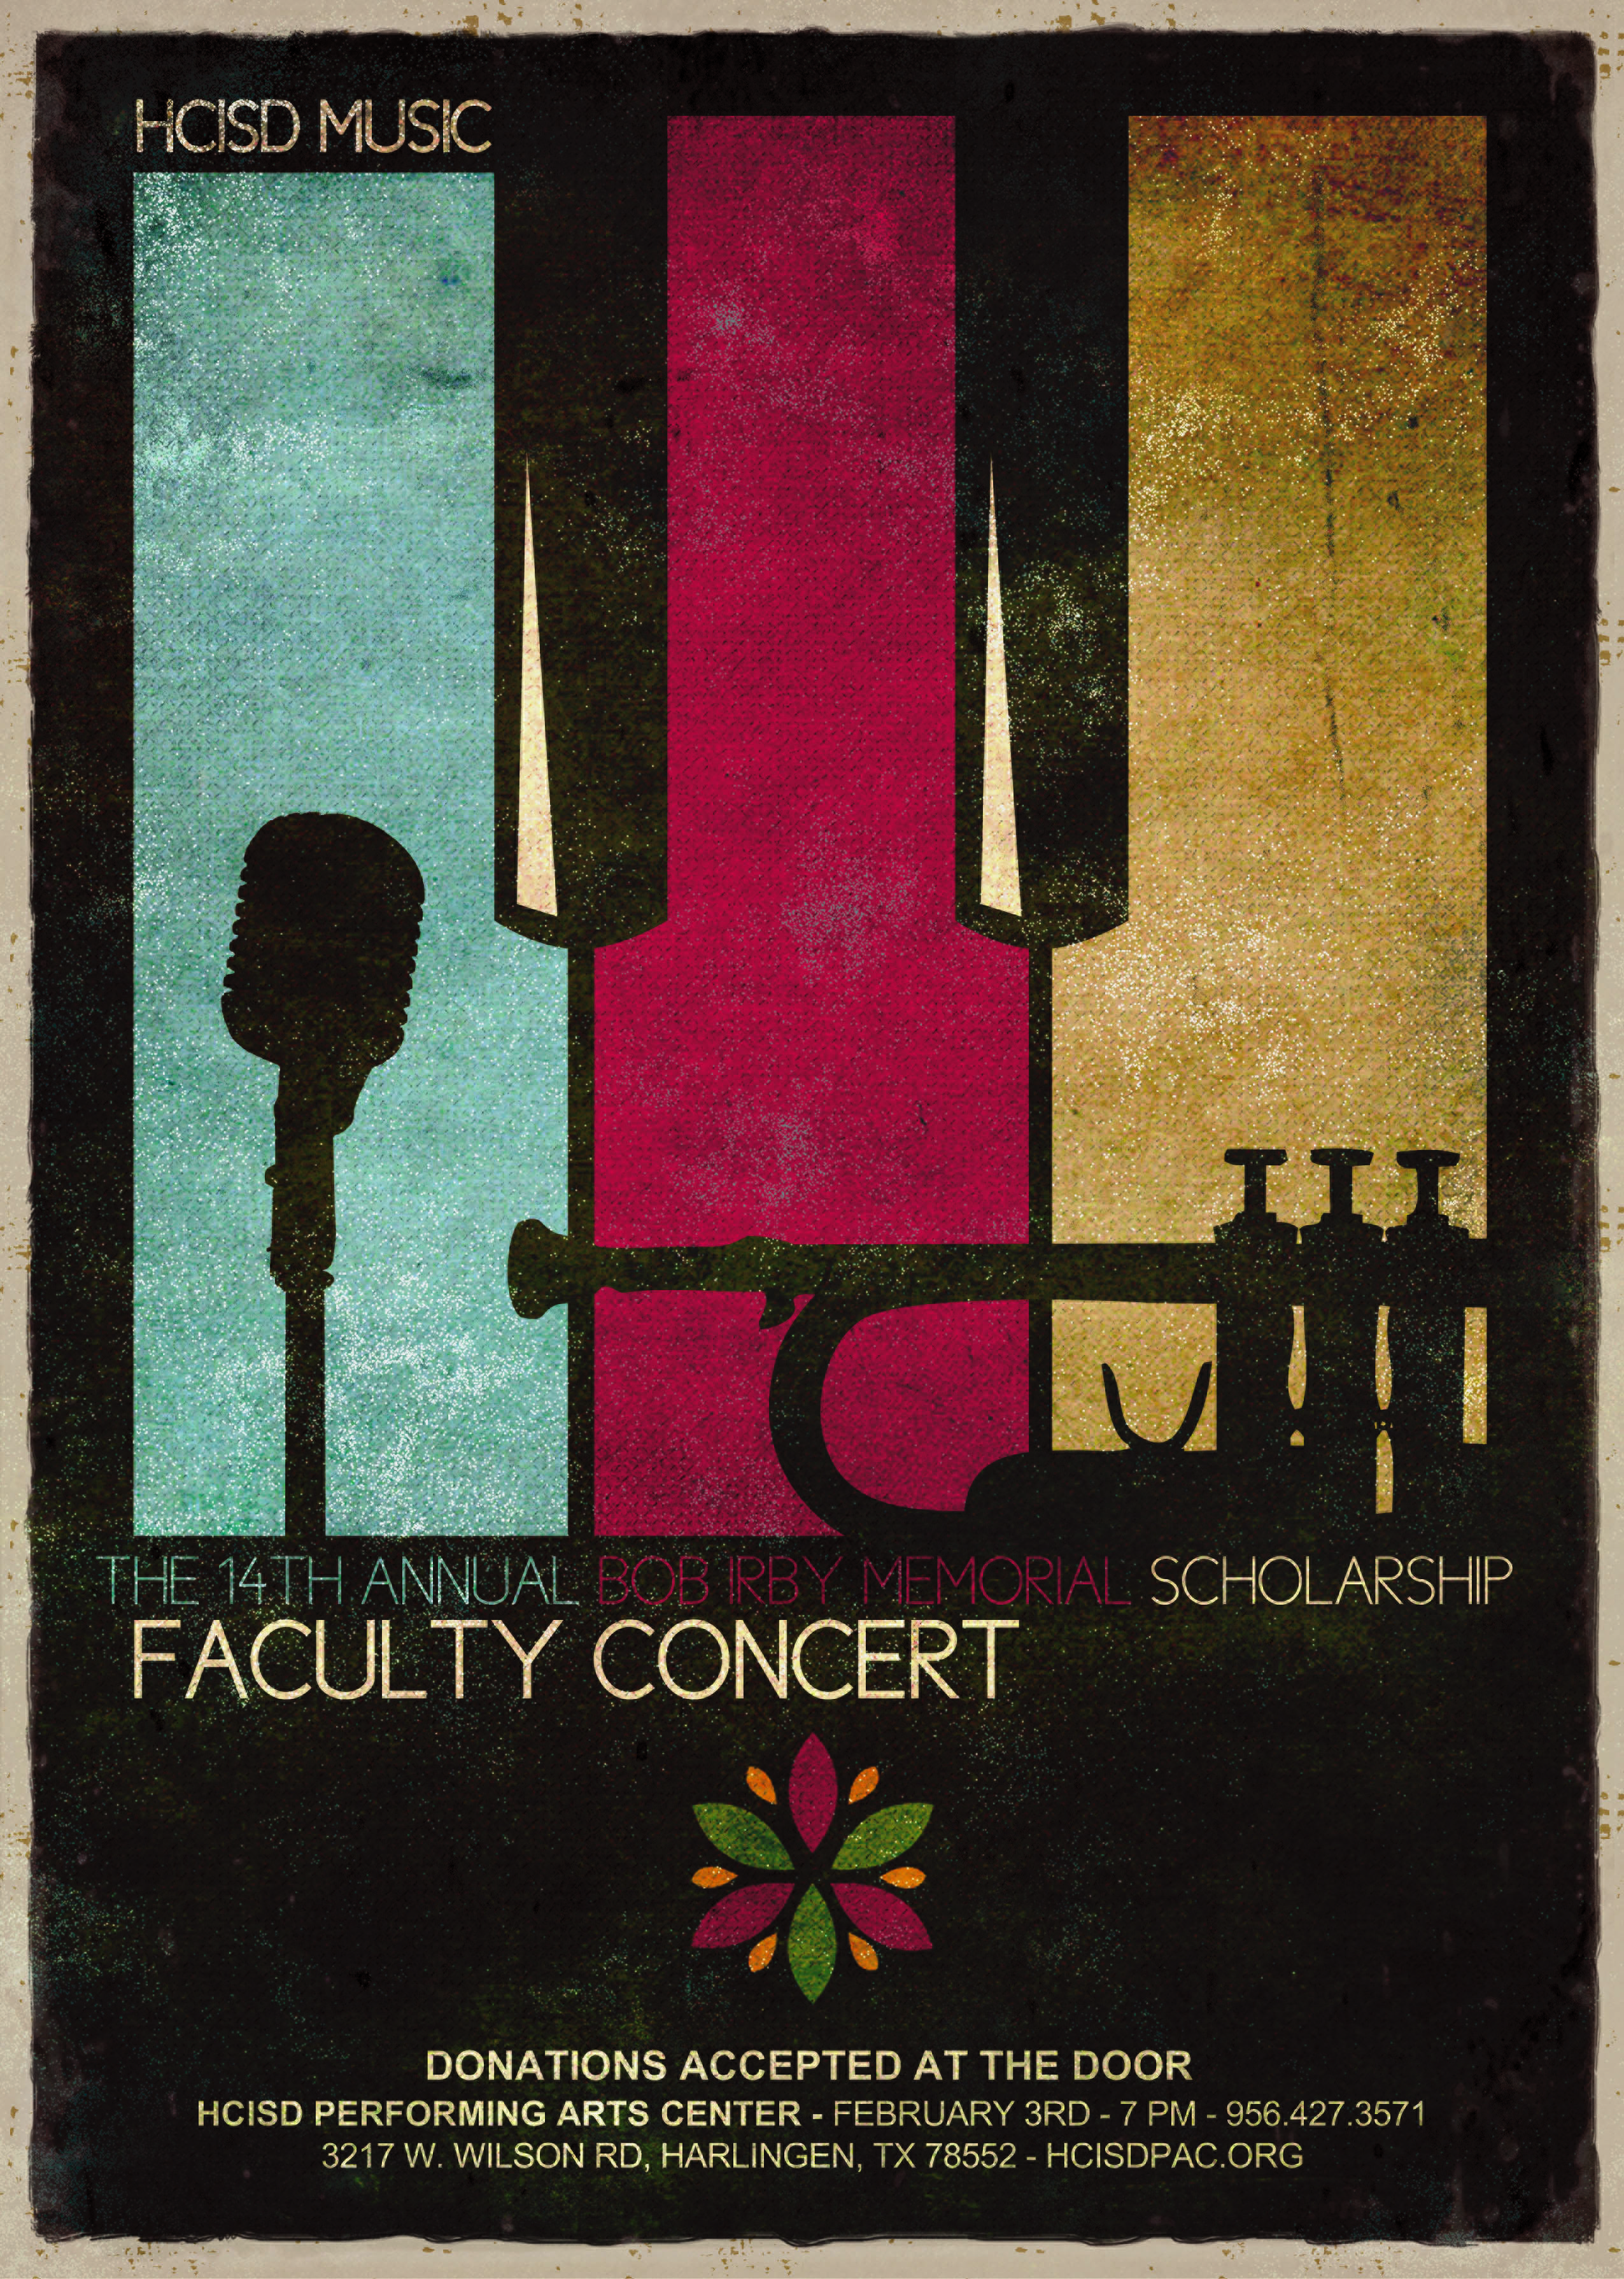 Community invited to 14th Annual Bob Irby Memorial Scholarship Faculty Concert